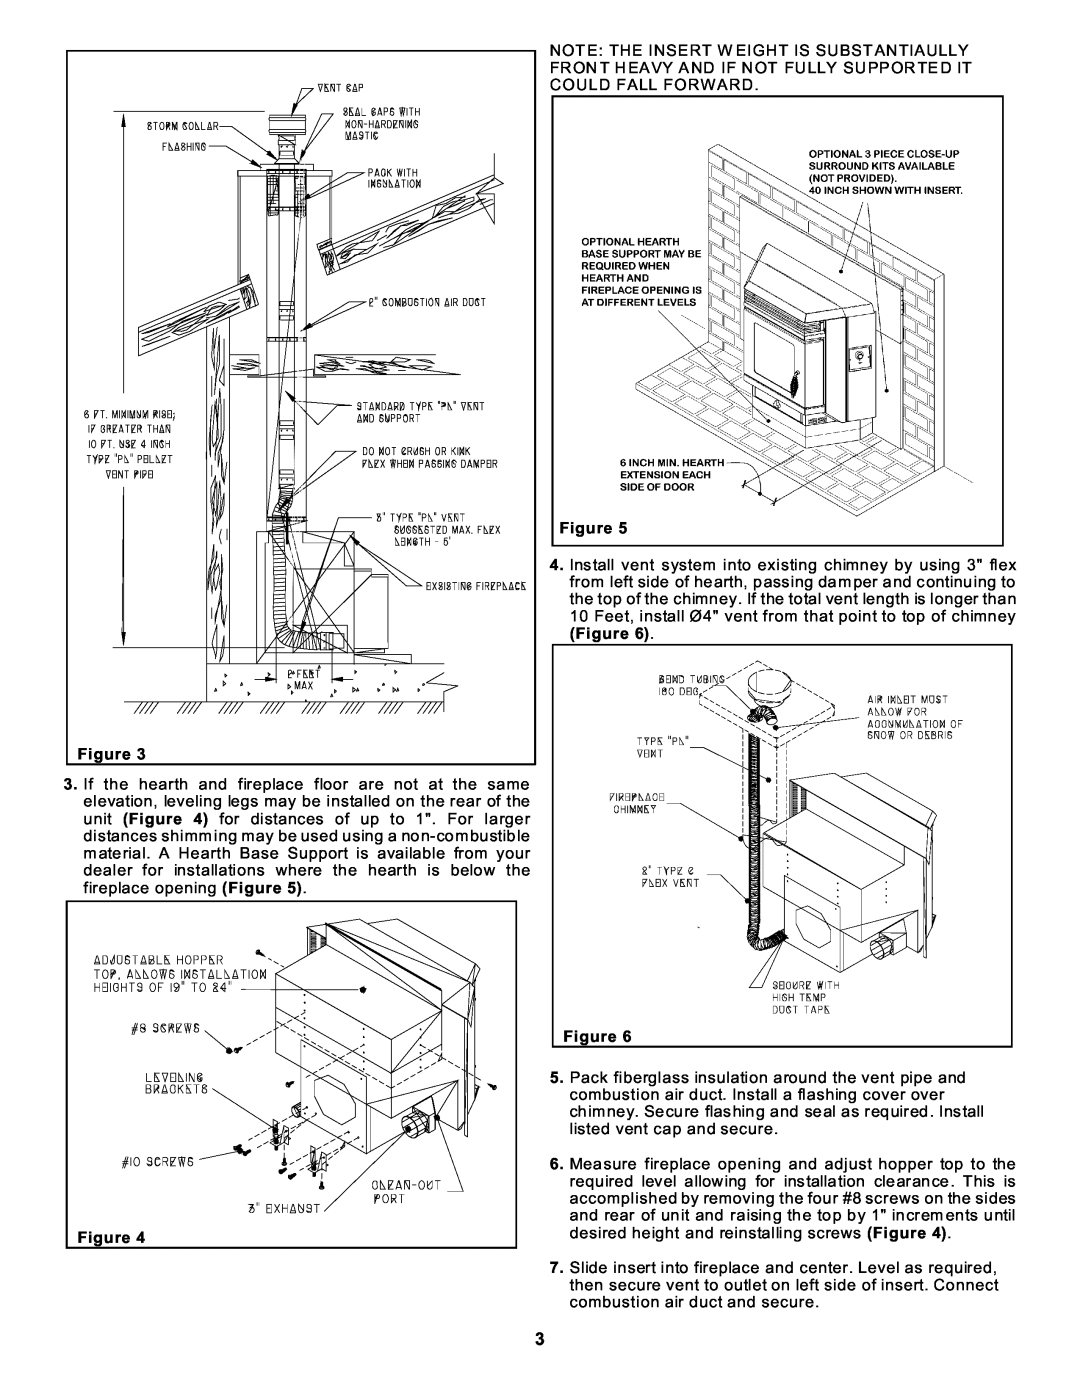 Sierra Products EF-4001B operating instructions 